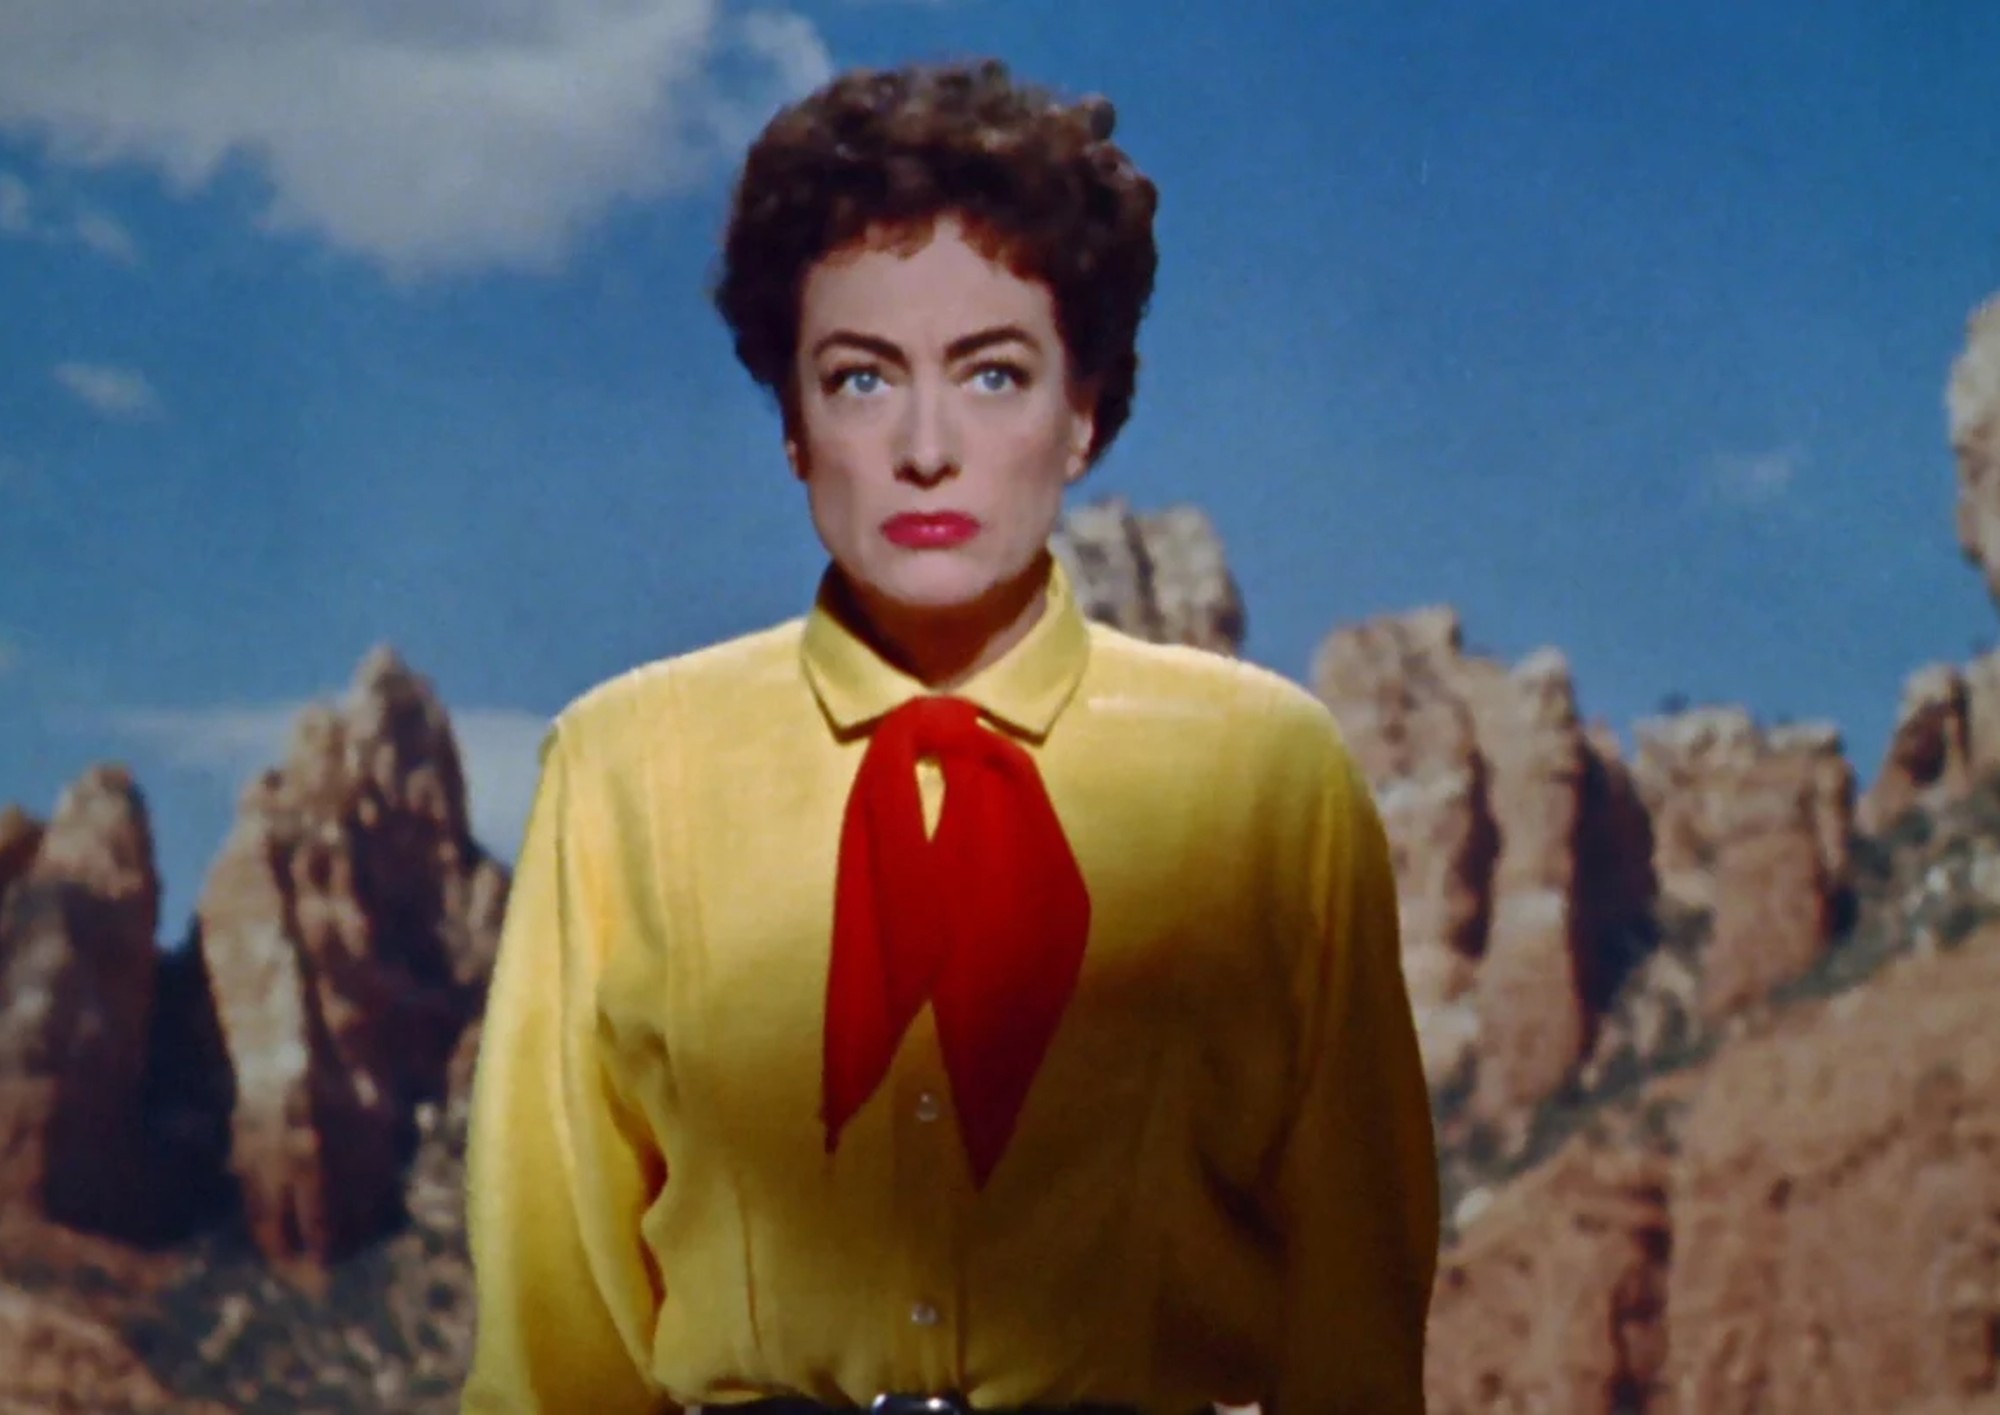 Image from the motion picture Johnny Guitar